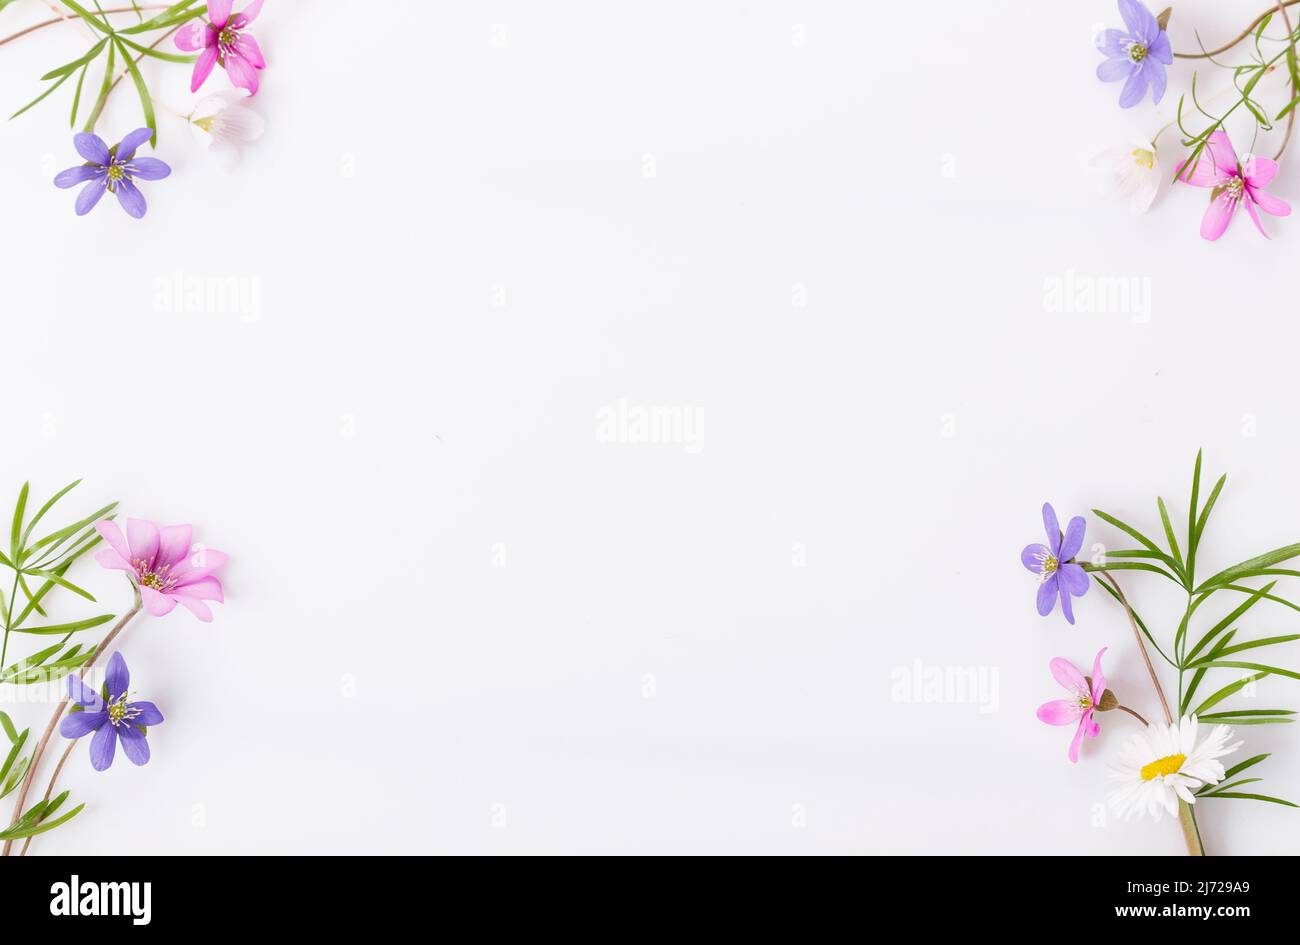 Delicate small wildflowers in pink, blue, purple on a white background Stock Photo